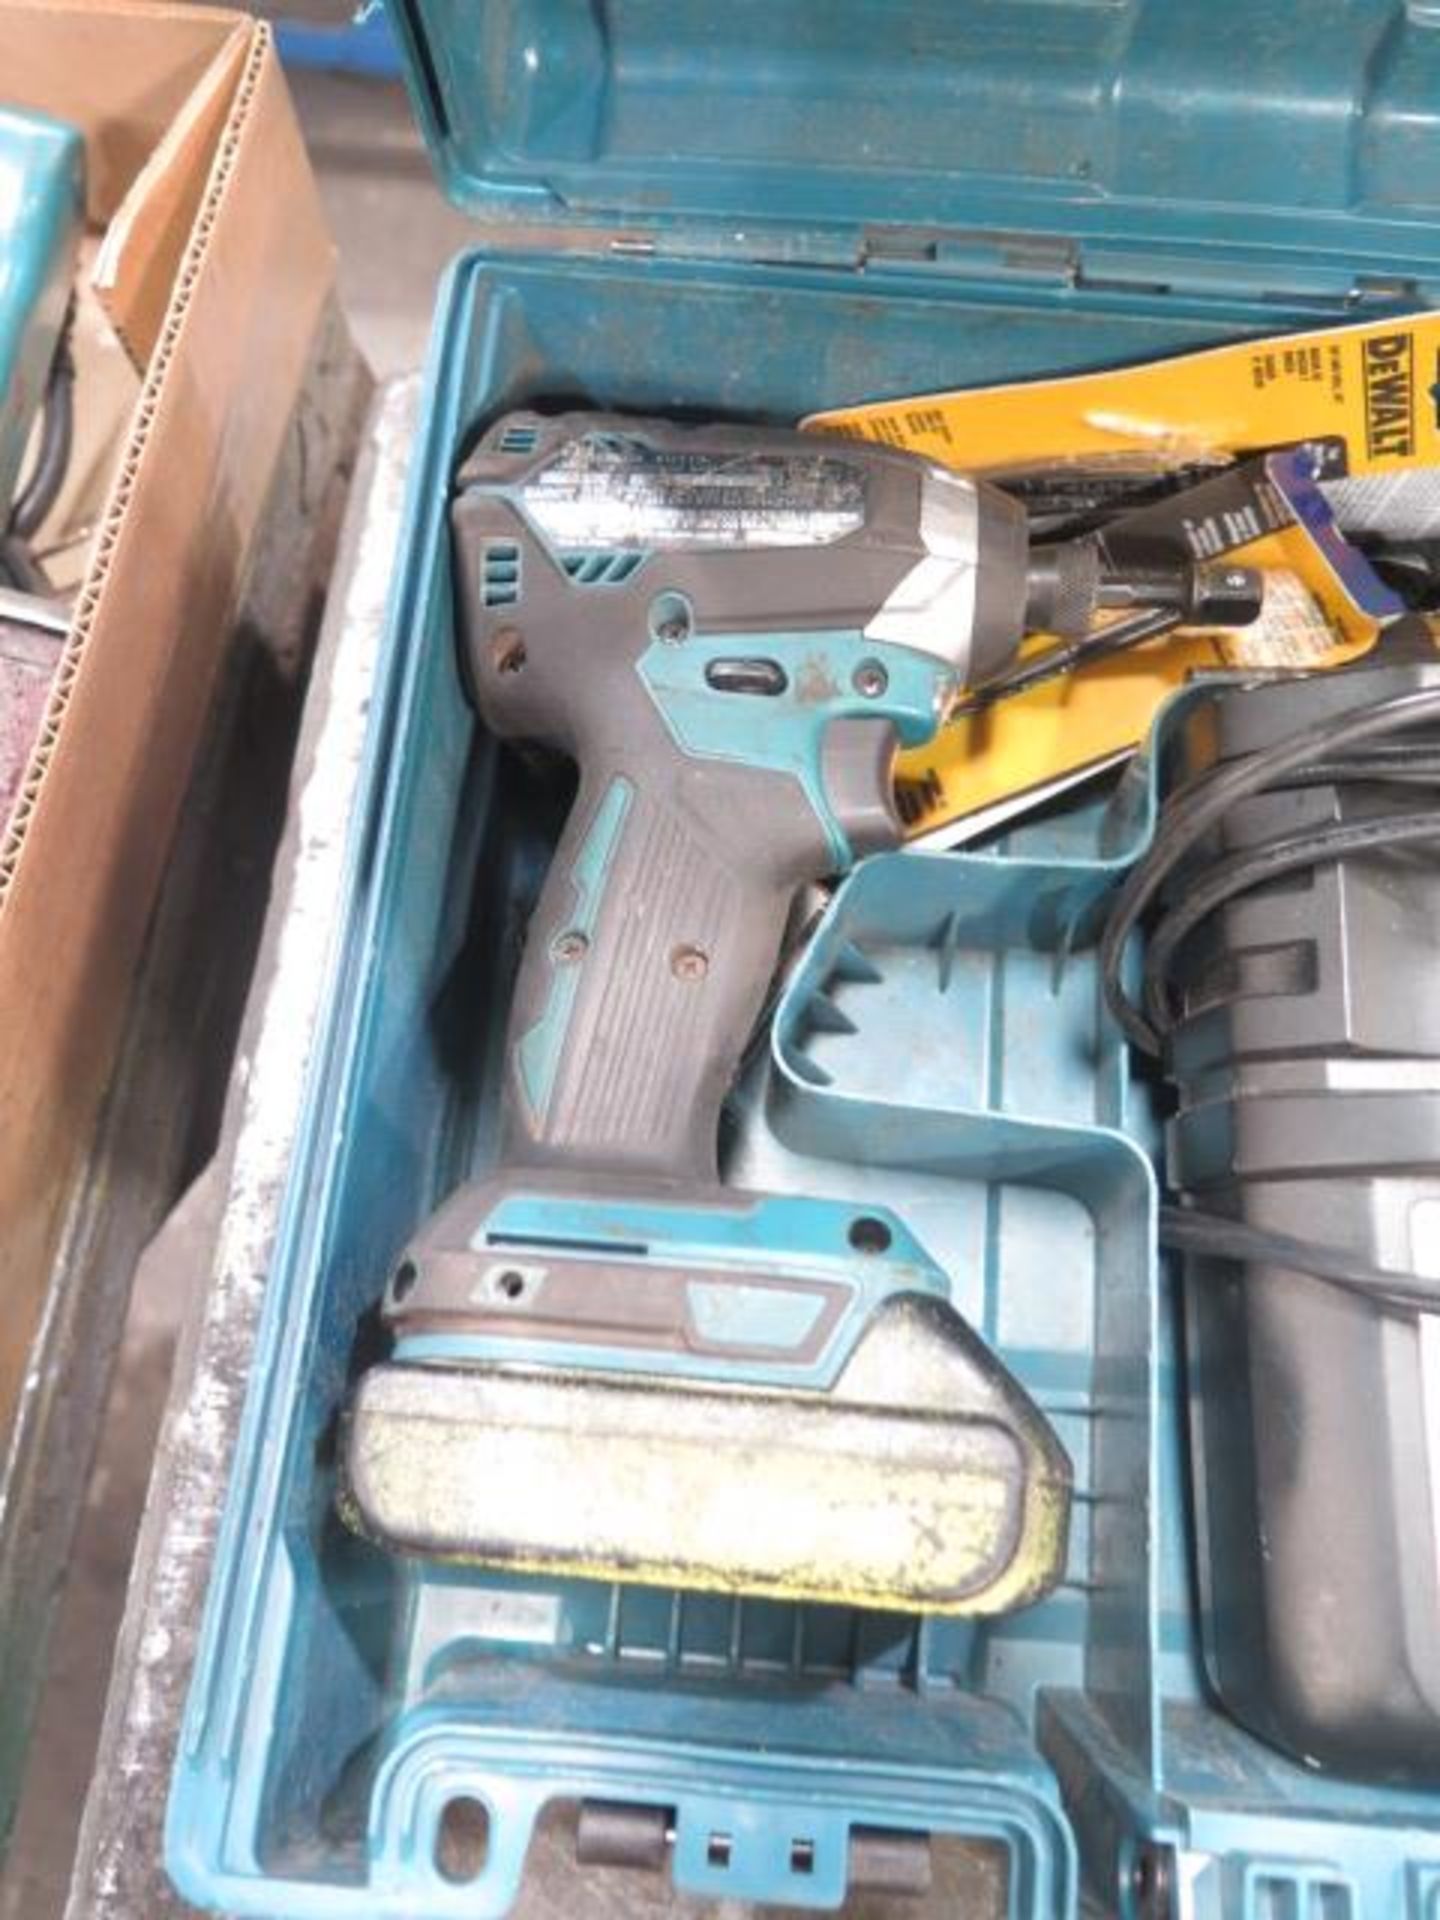 Makita 18V Cordless Drill and Nut Driver Set w/ Charger (SOLD AS-IS - NO WARRANTY) - Image 4 of 5